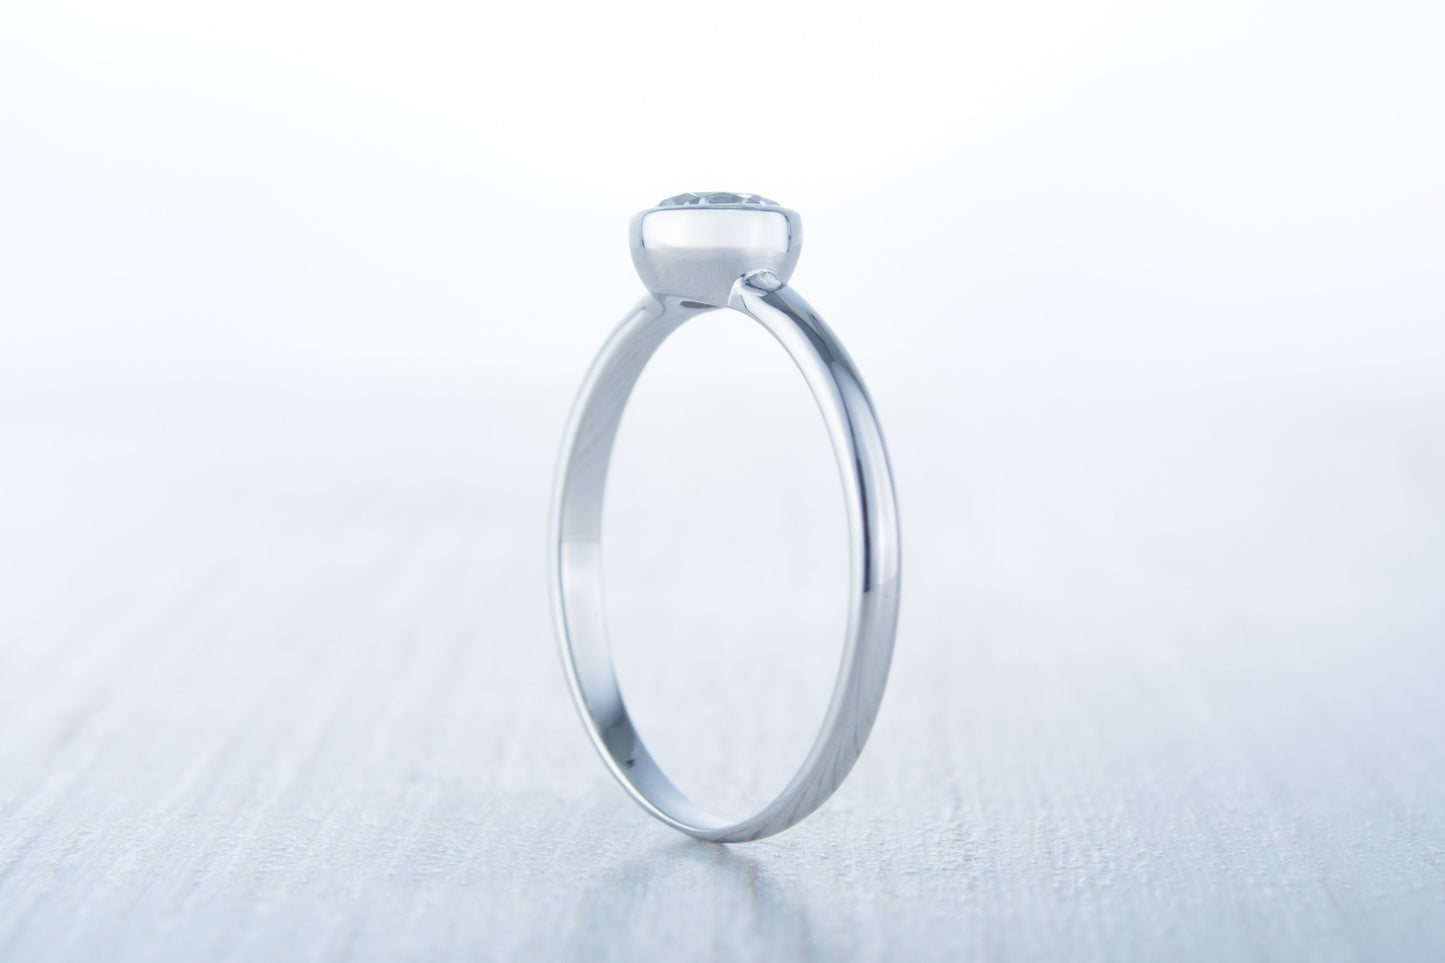 Simulated diamond bezel set solitaire ring - Available in white gold or sterling silver - handmade ring